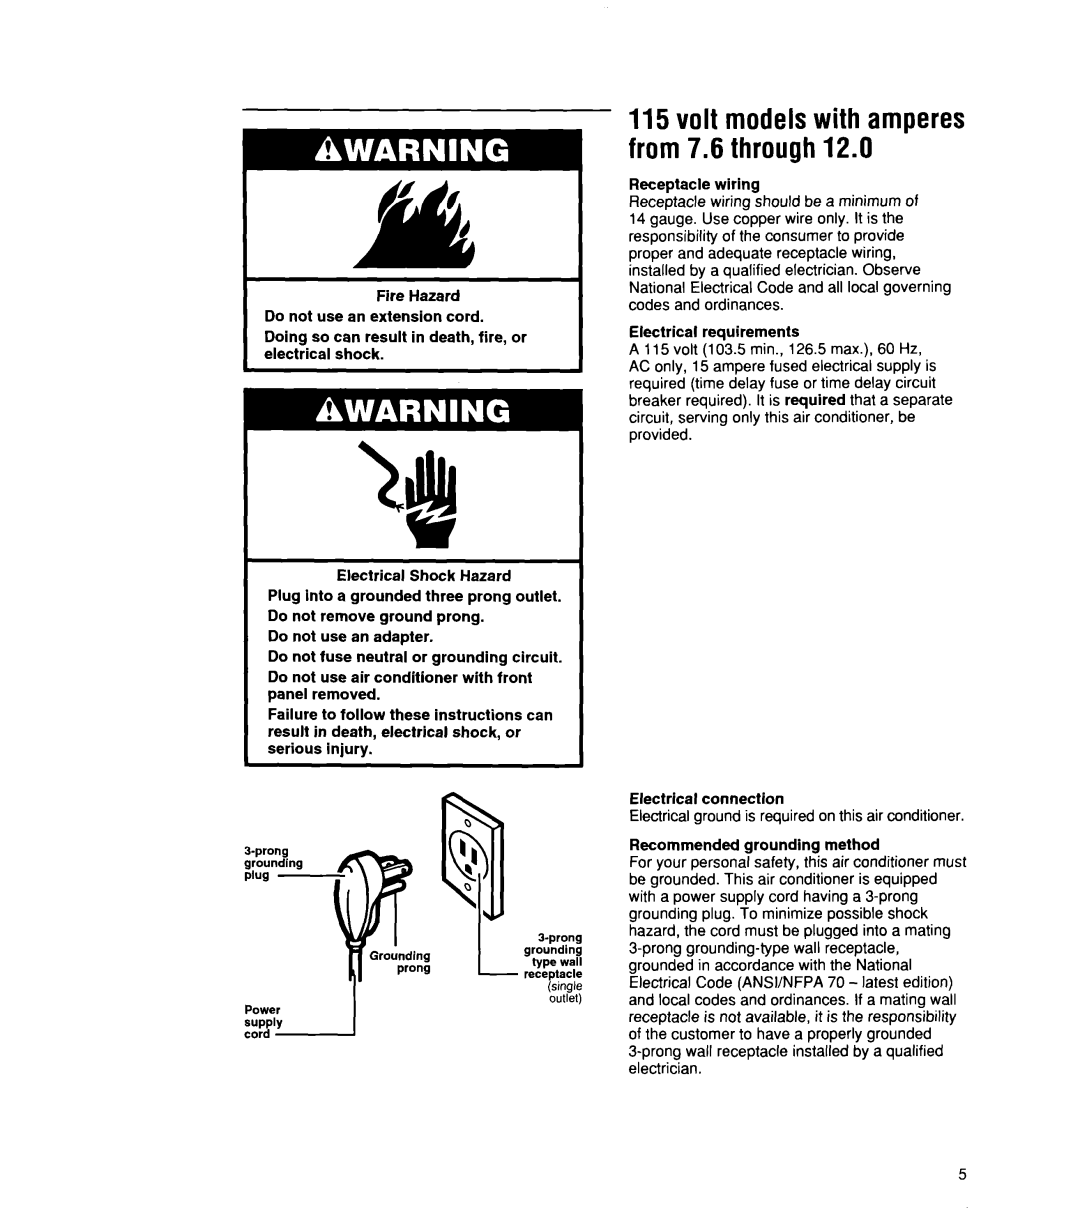 Whirlpool ACU072XE installation instructions 115volt modelswith amperes from 7.6 through12.0 